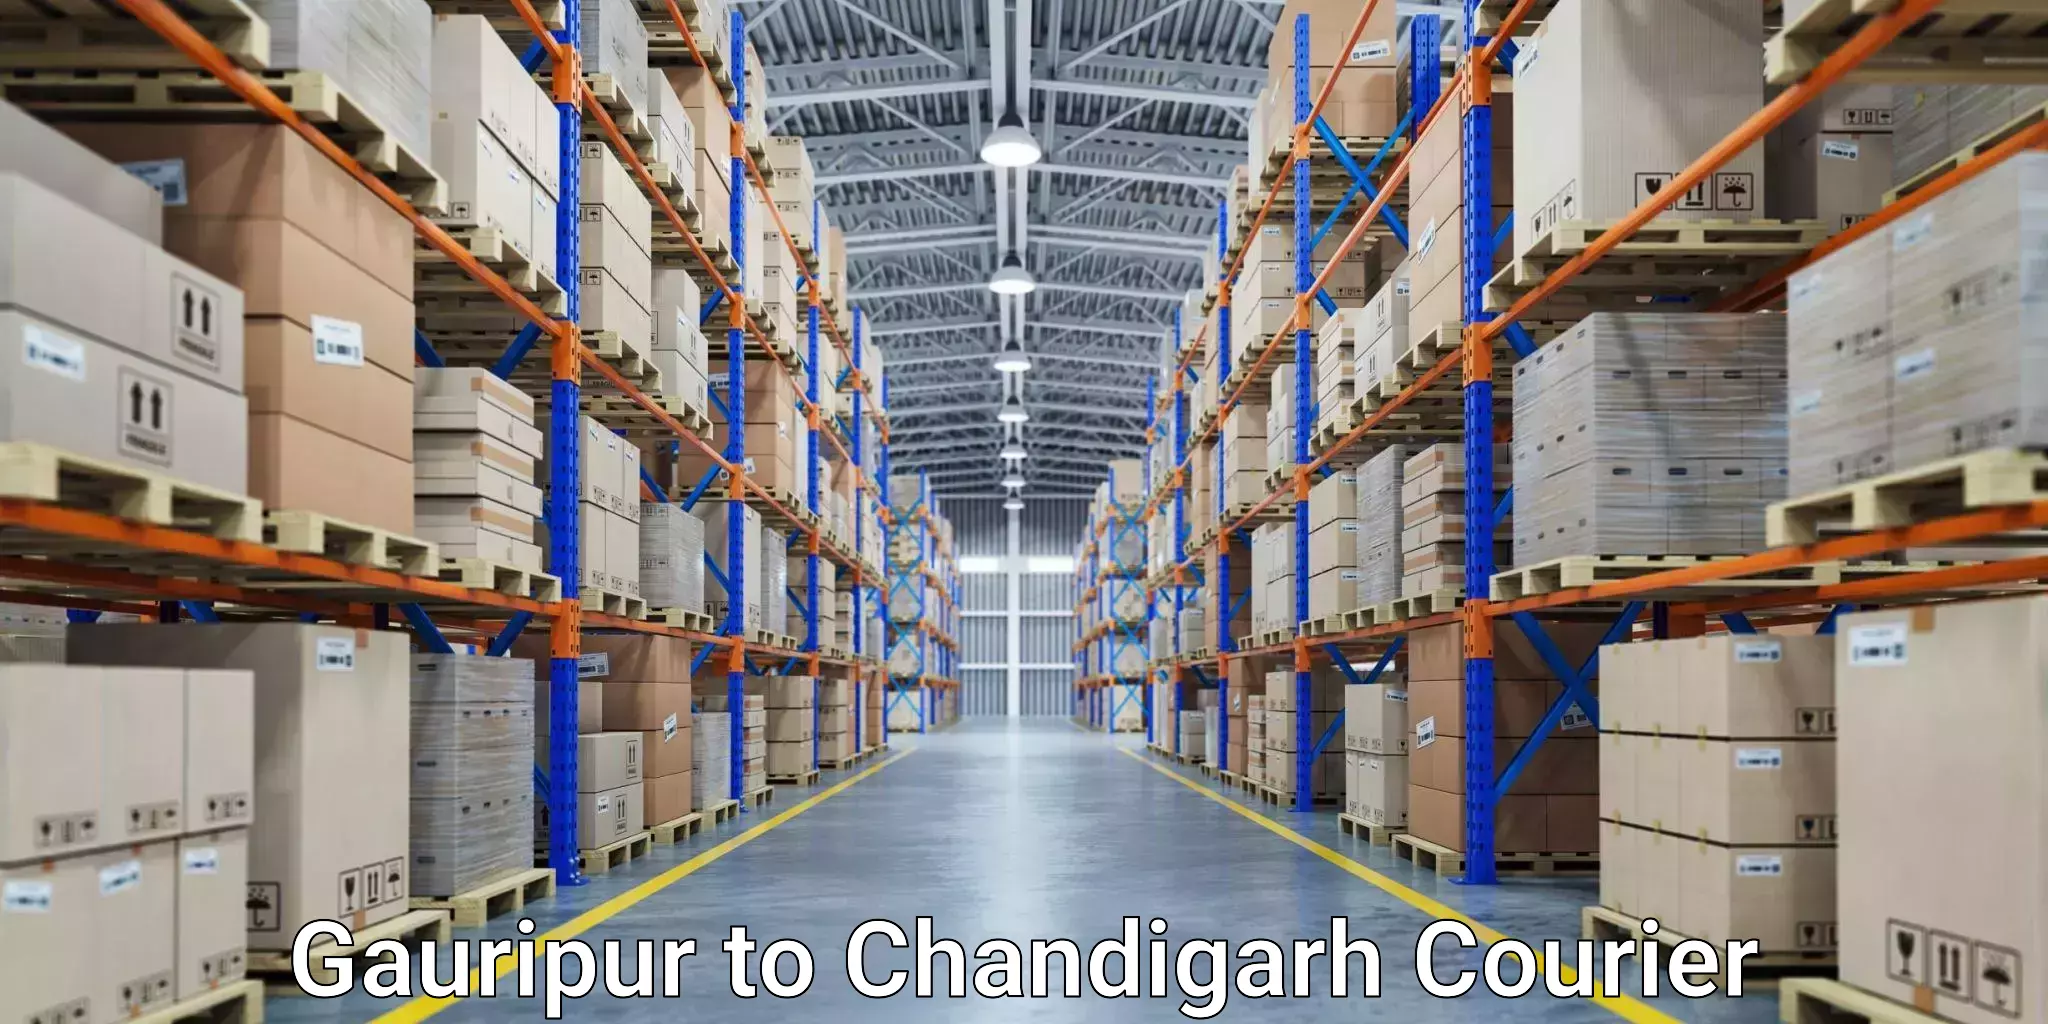 Automated shipping processes Gauripur to Chandigarh